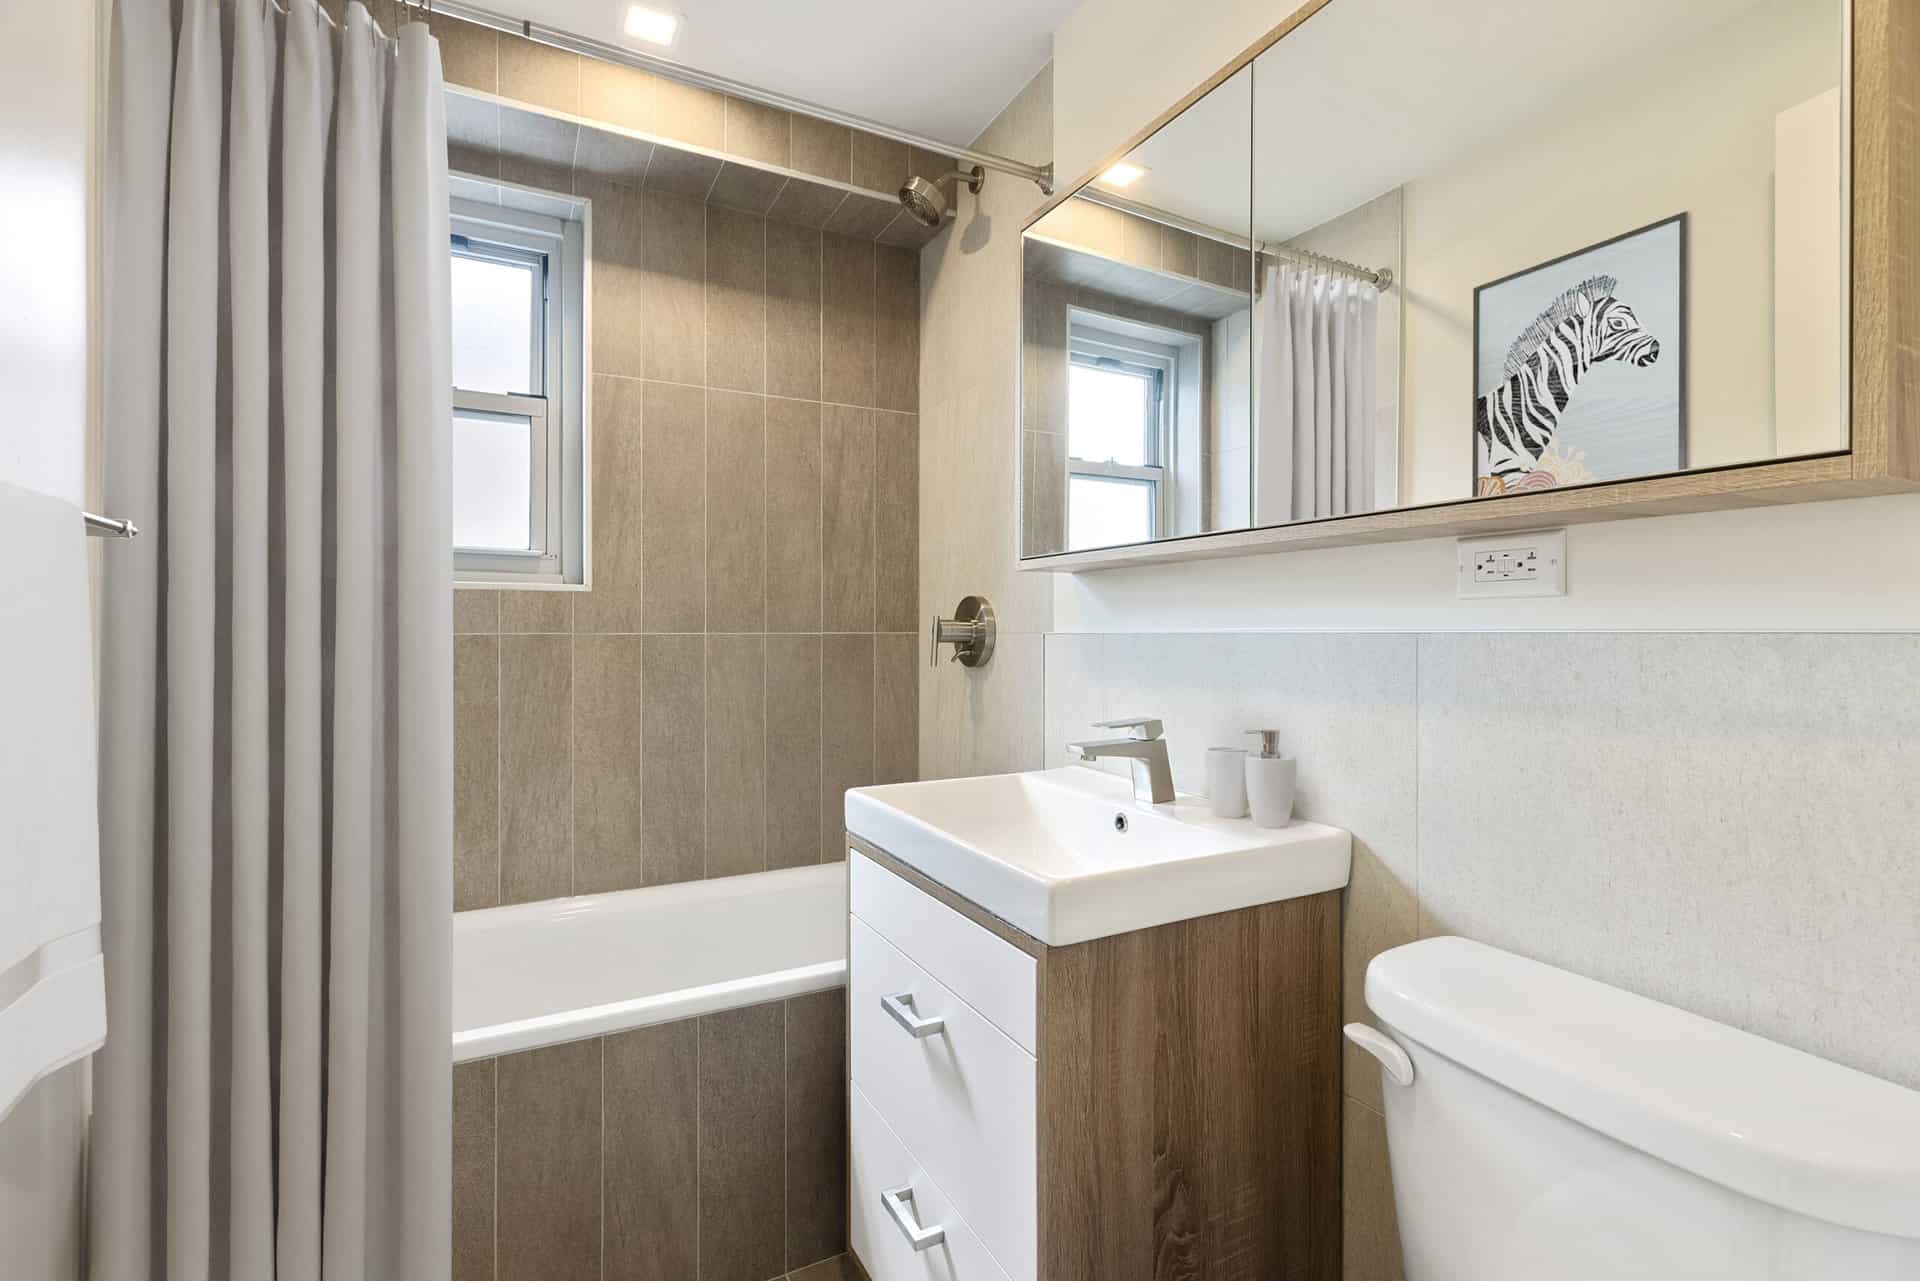 Bathroom at 60 East 12th Street apartment with single vanity, large rectangle mirror cabinet and soaking tub with shower.